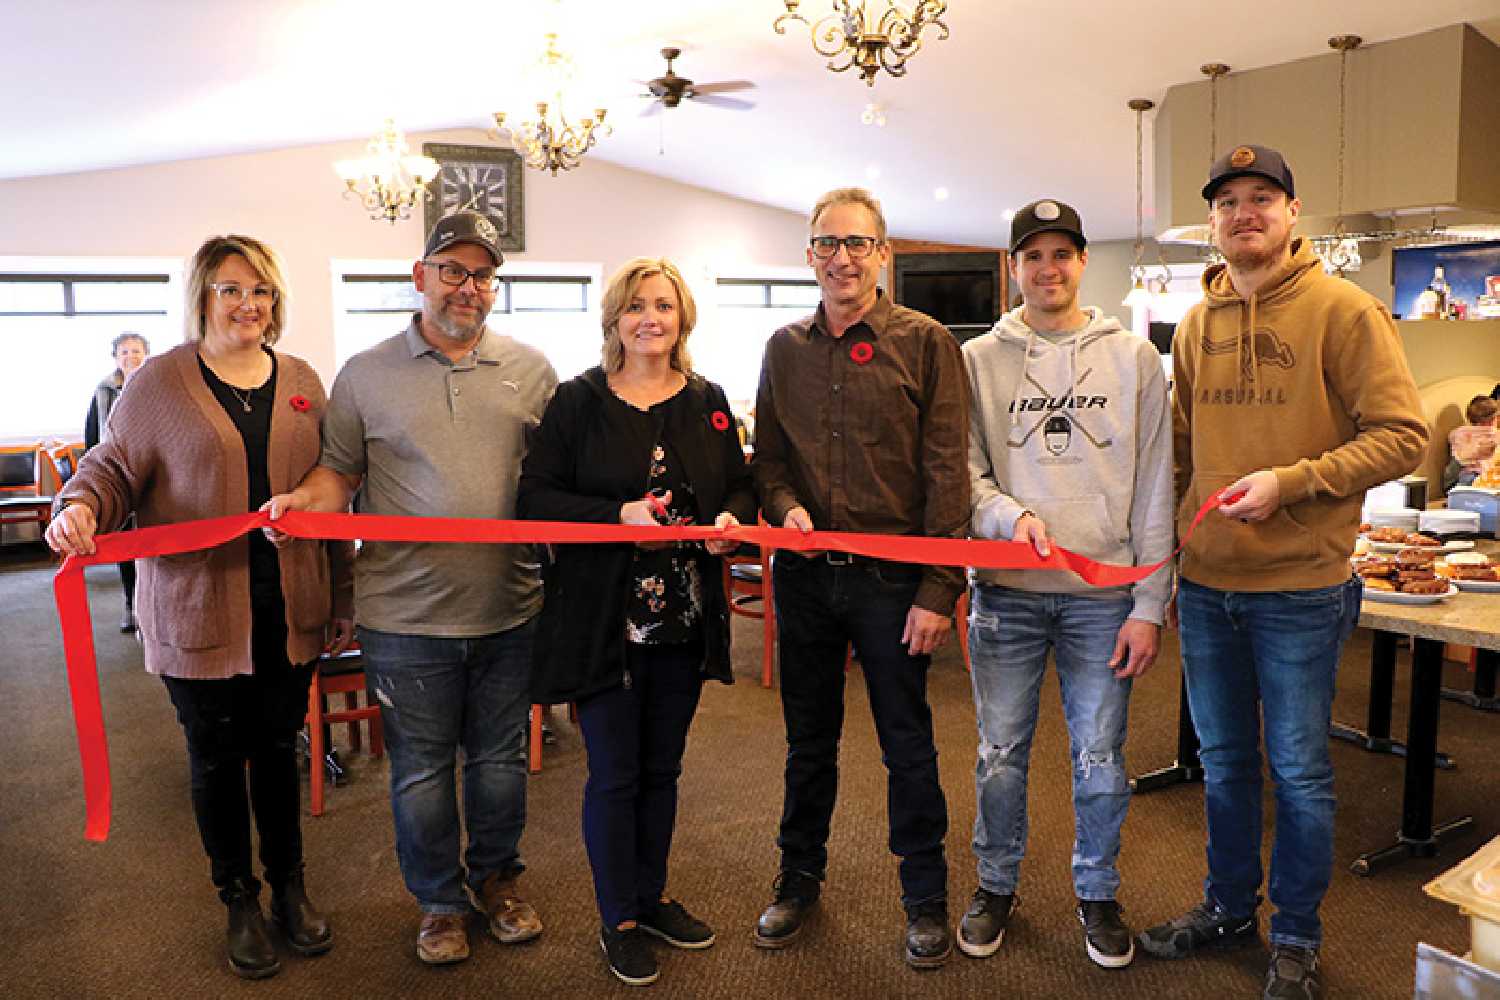 Cutting the ribbon at the new Rocanville golf clubhouse grand opening on Saturday, November 5. From left are clubhouse manager Crystal Rankin, Rocanville mayor Ron Reed, and golf board members Denise Kruppi, Ken Nixon (project manager), Ashley Howie, and Dylan Danielson.